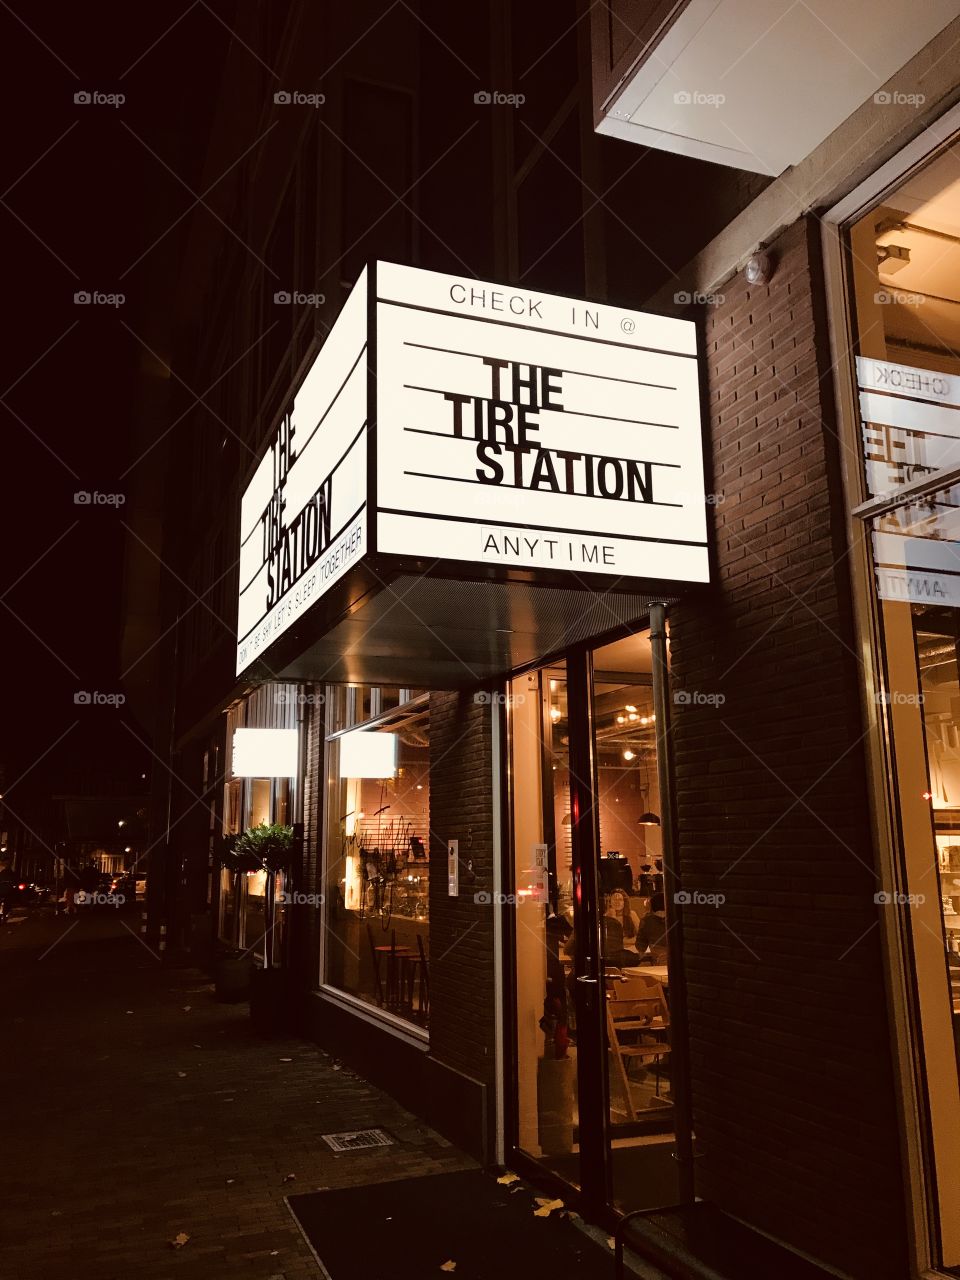 The tire station in Amsterdam 